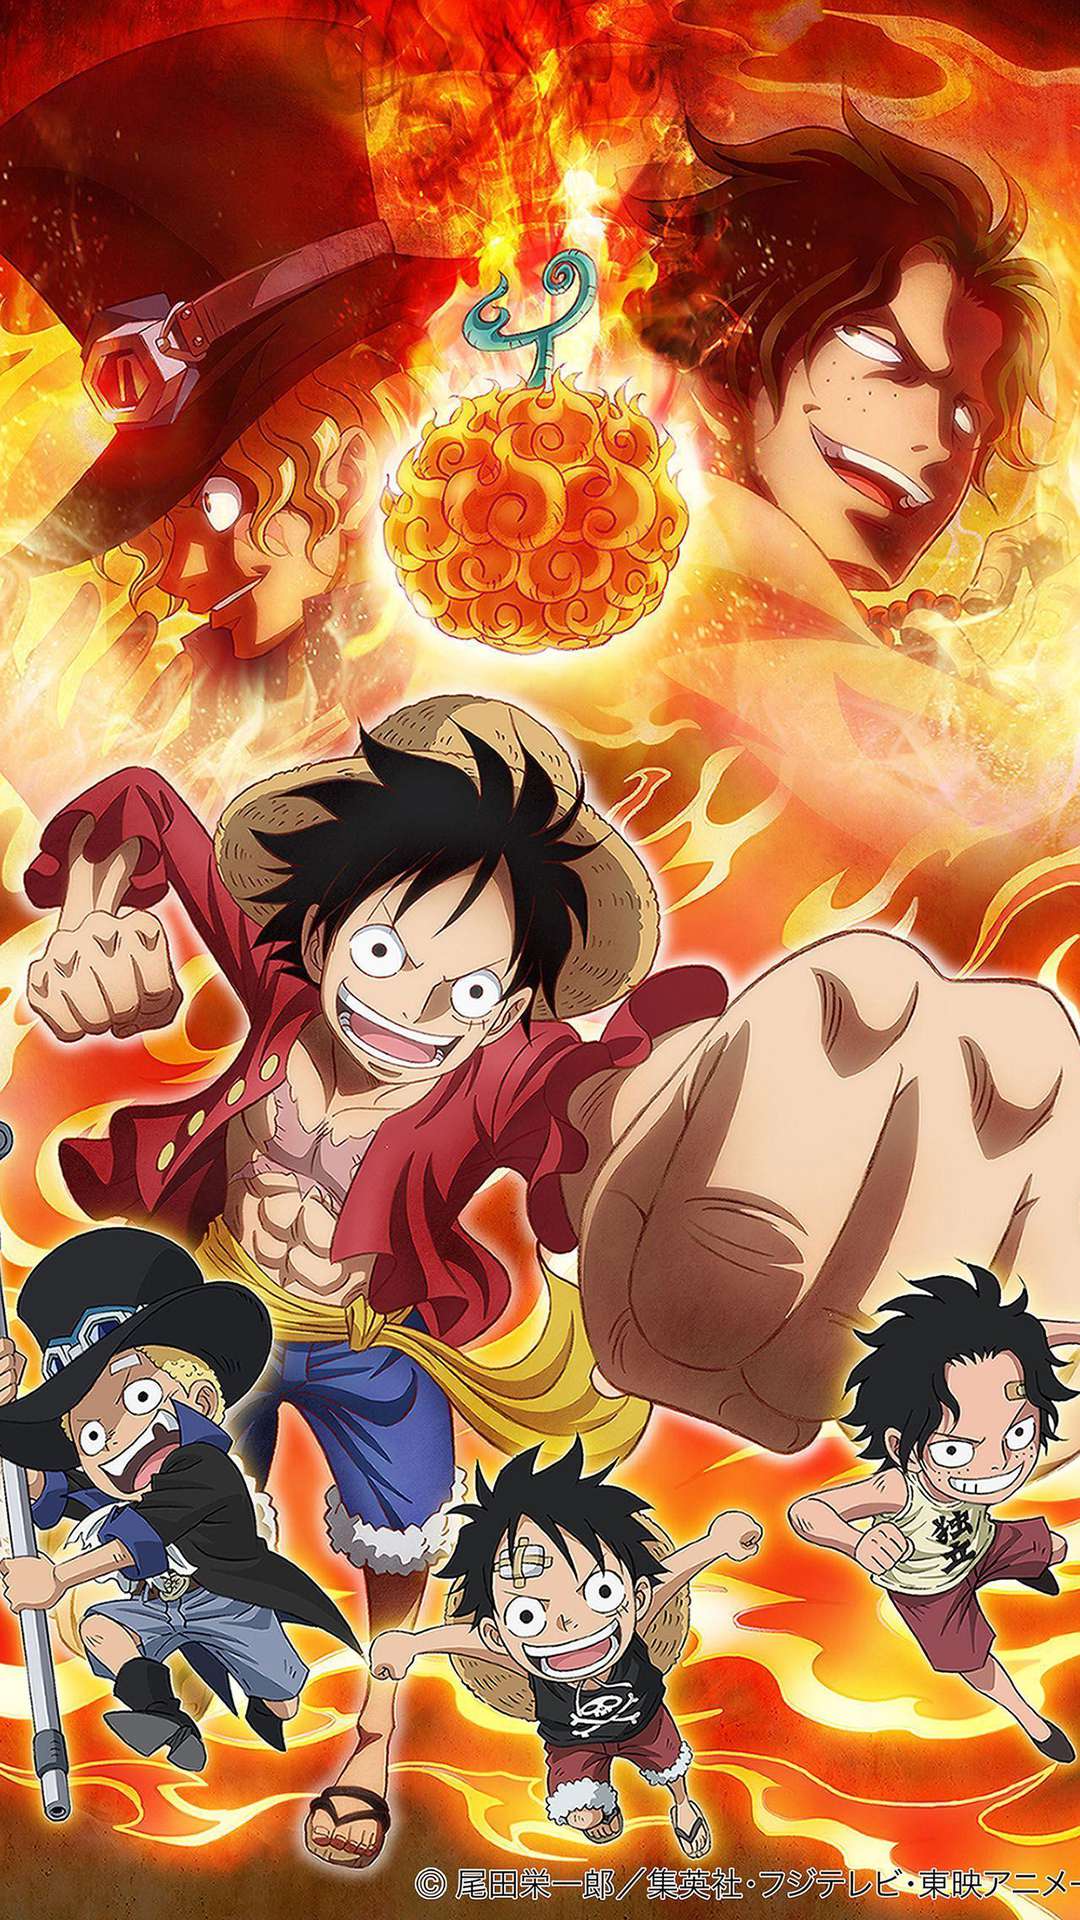 Wallpaper ID 457765  Anime One Piece Phone Wallpaper Monkey D Luffy Portgas  D Ace 720x1280 free download